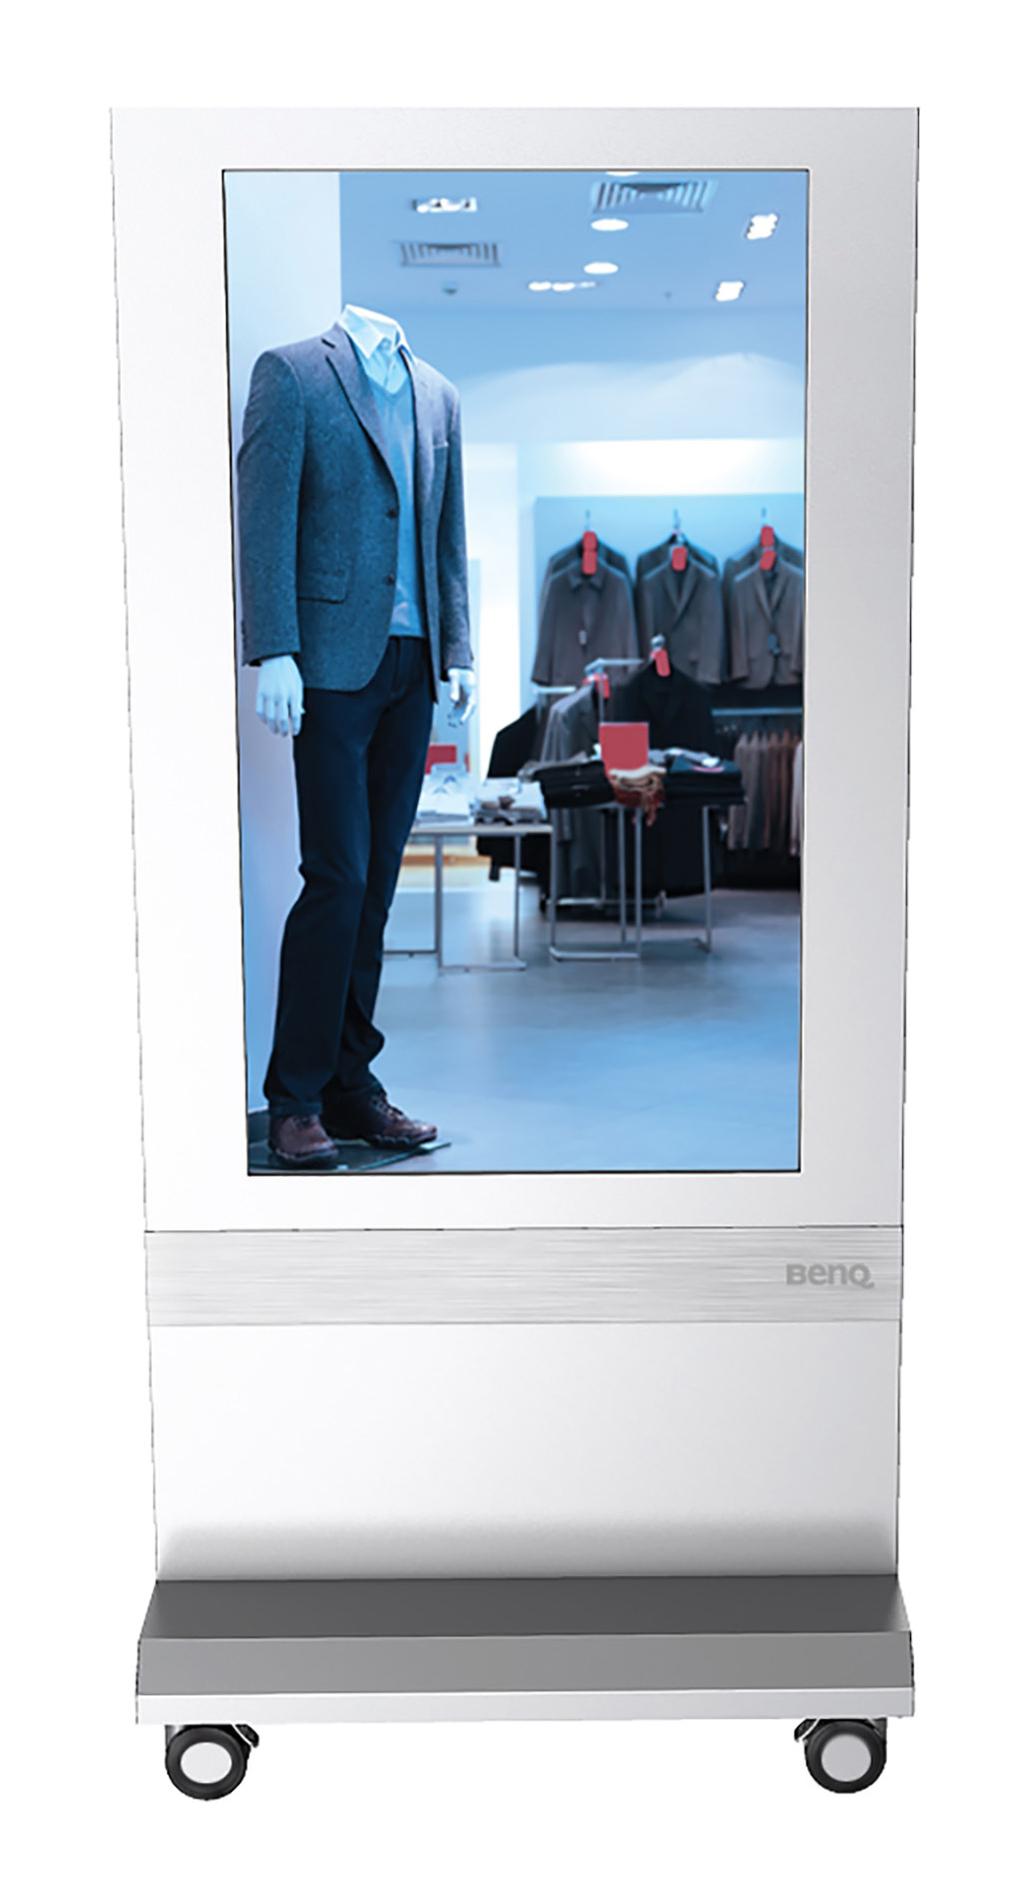 Incredibly Thin and Lightweight: The BenQ Dual-Sided Digital Signage Solution features the DL550F panel, which is less than one inch wide.